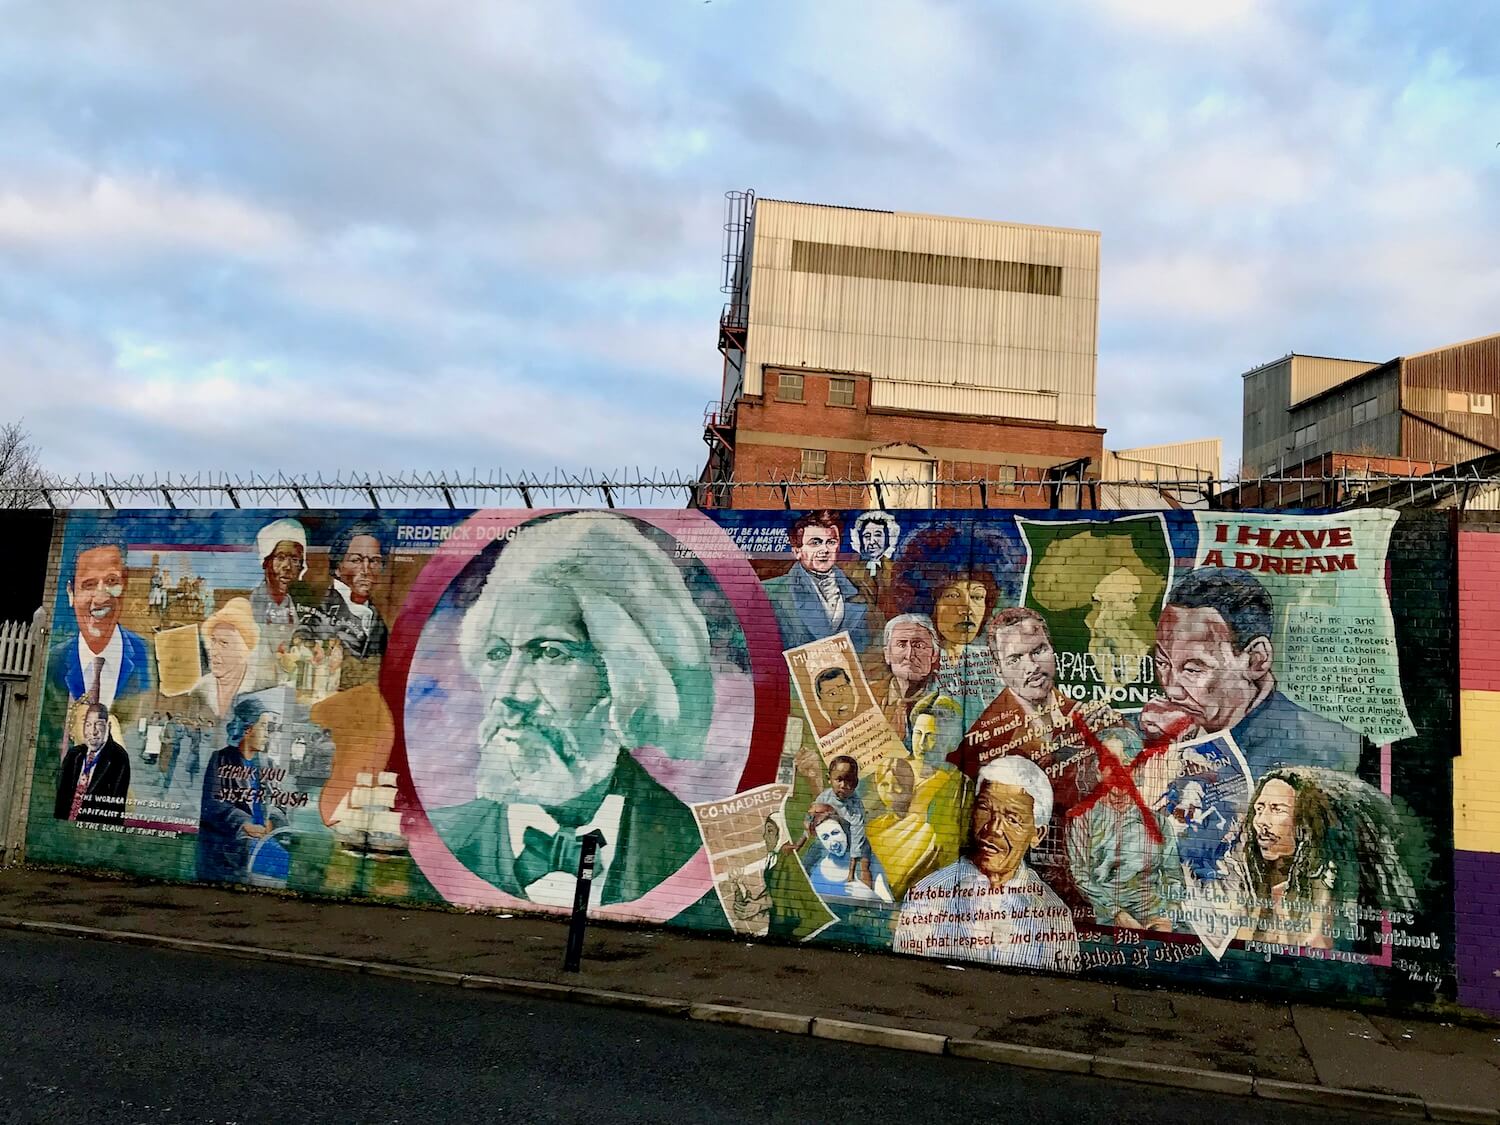 One of the many fences dividing the politics in Belfast with murals depicting various icons of liberation in the midst of oppression.